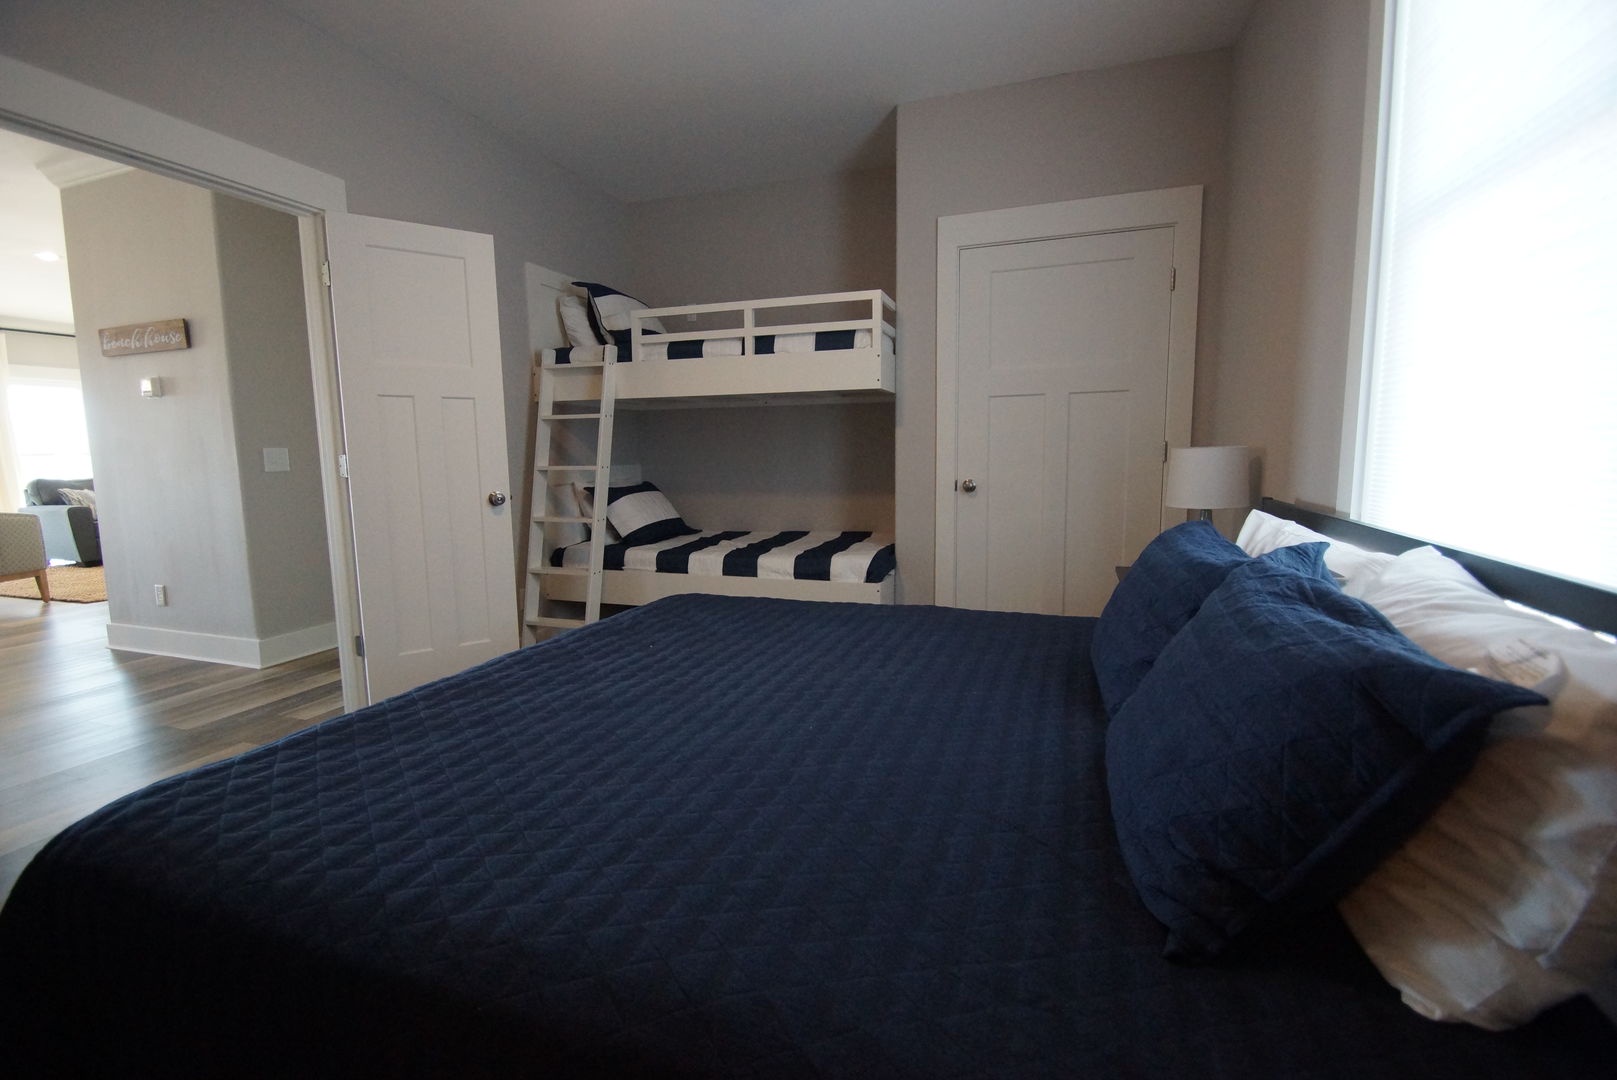 Bedroom 3, king bed, 2 twin bunks, sleeps 4, TV and attached bath